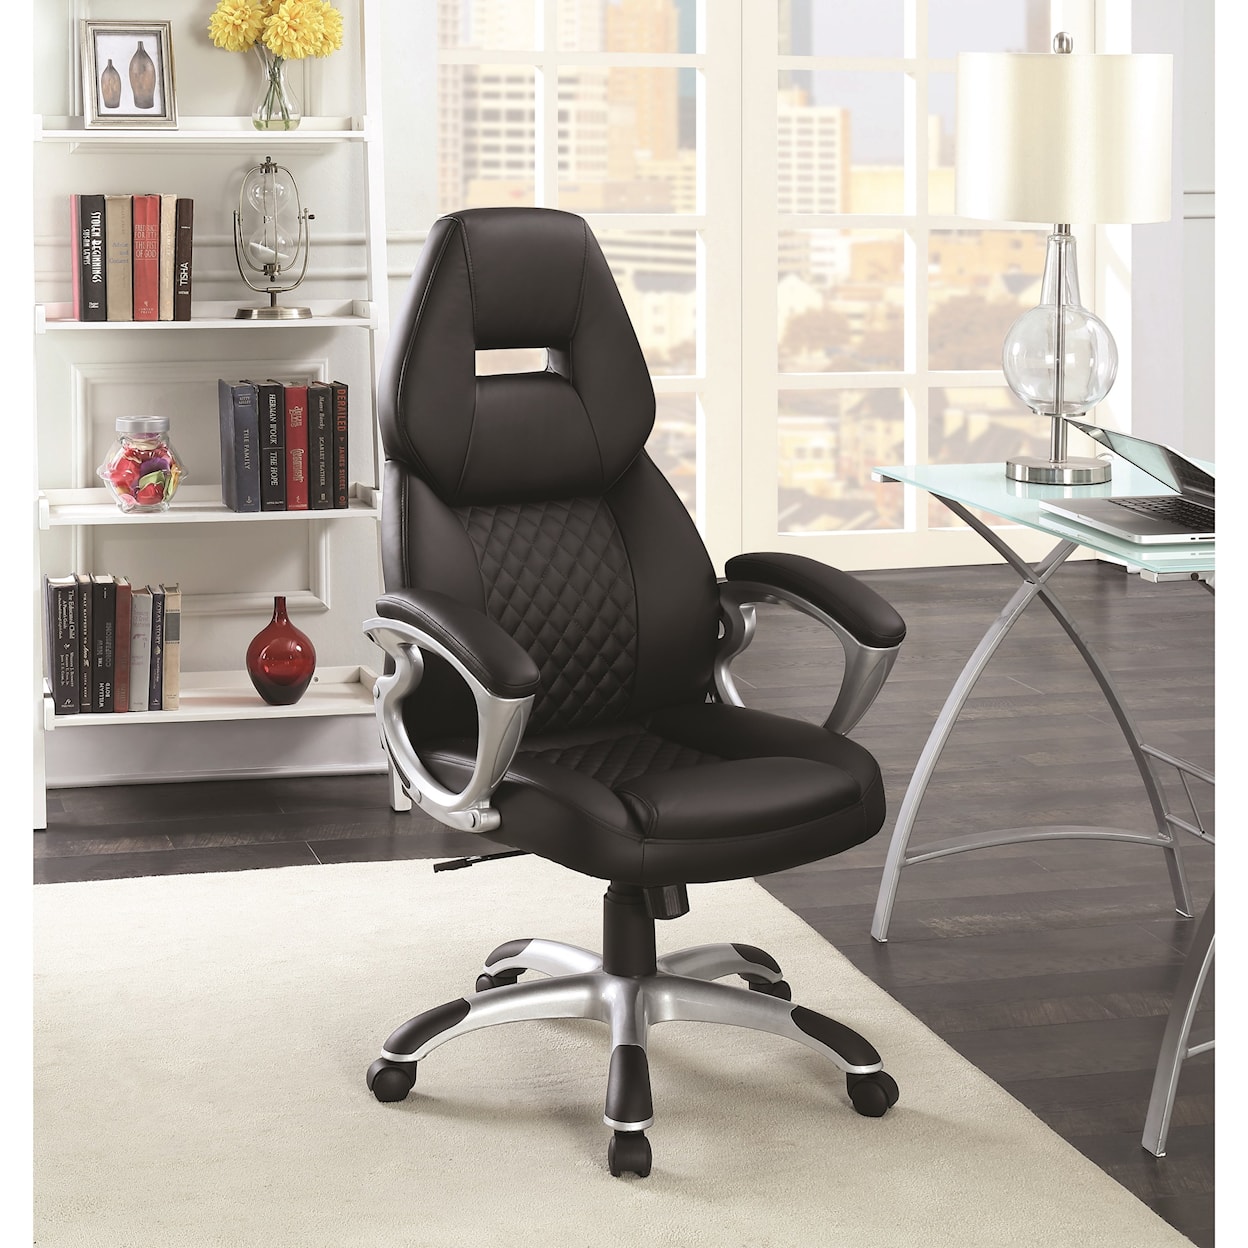 Michael Alan CSR Select Office Chairs Office Chair